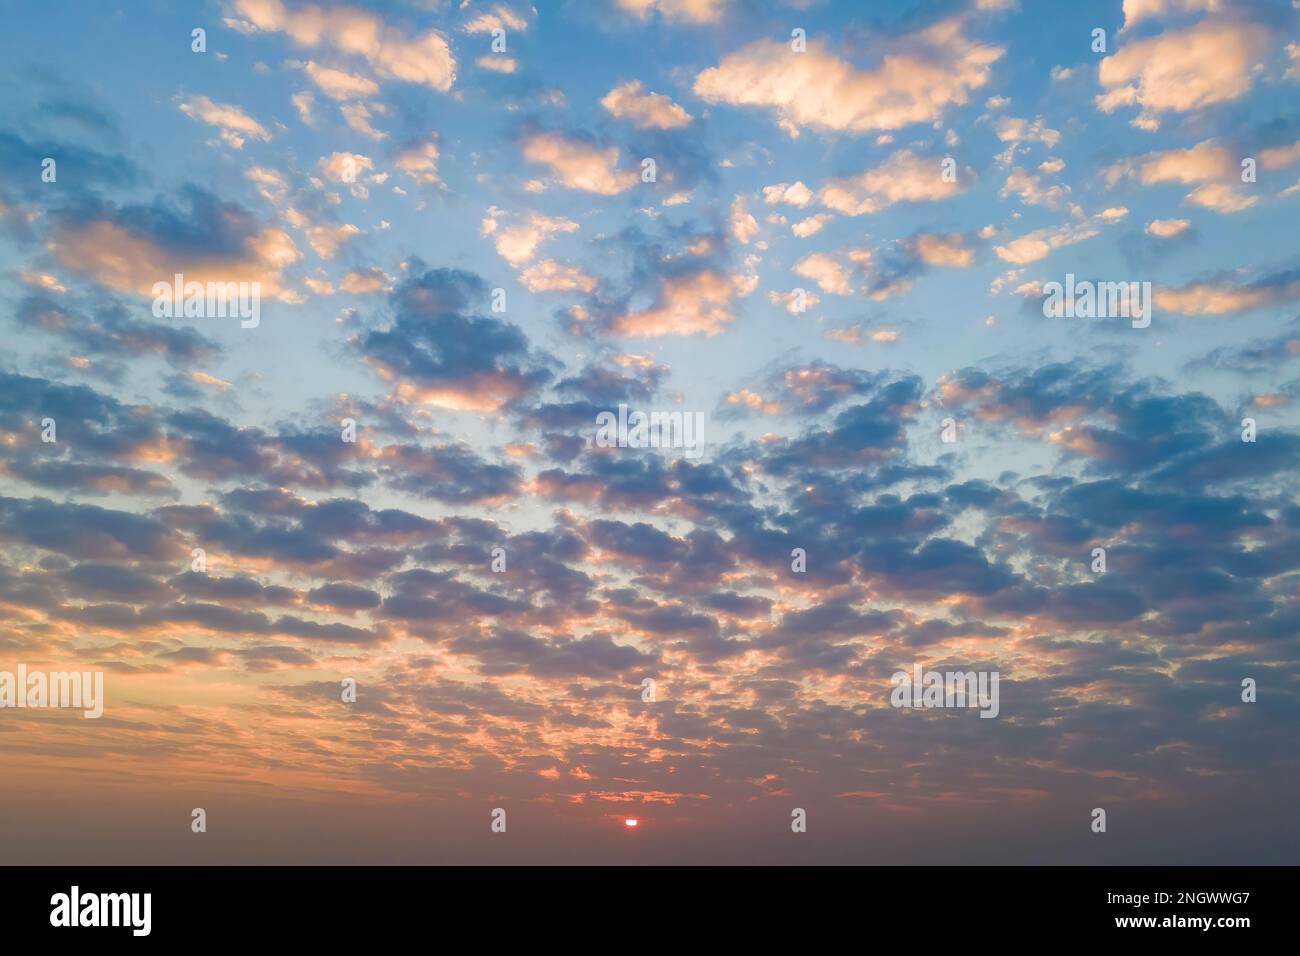 Cirrus clouds on the sunset sky. Nature background Stock Photo